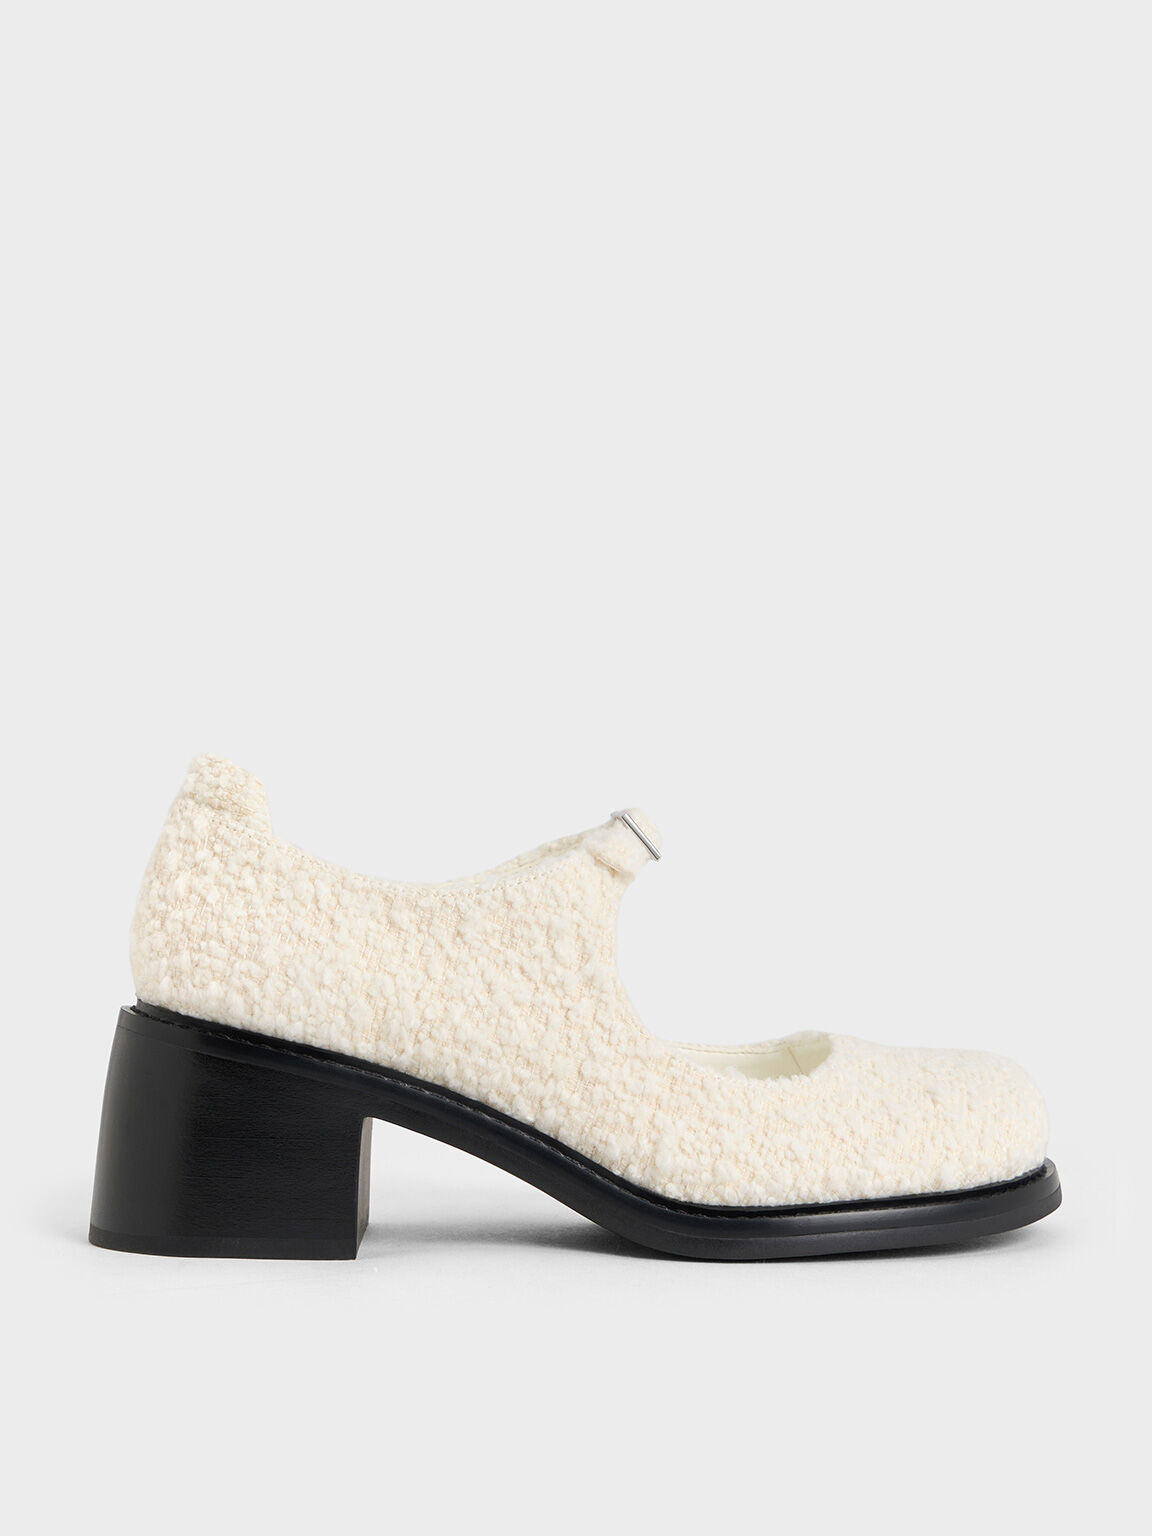 Rooney Furry Buckled Block-Heel Mary Janes, White, hi-res